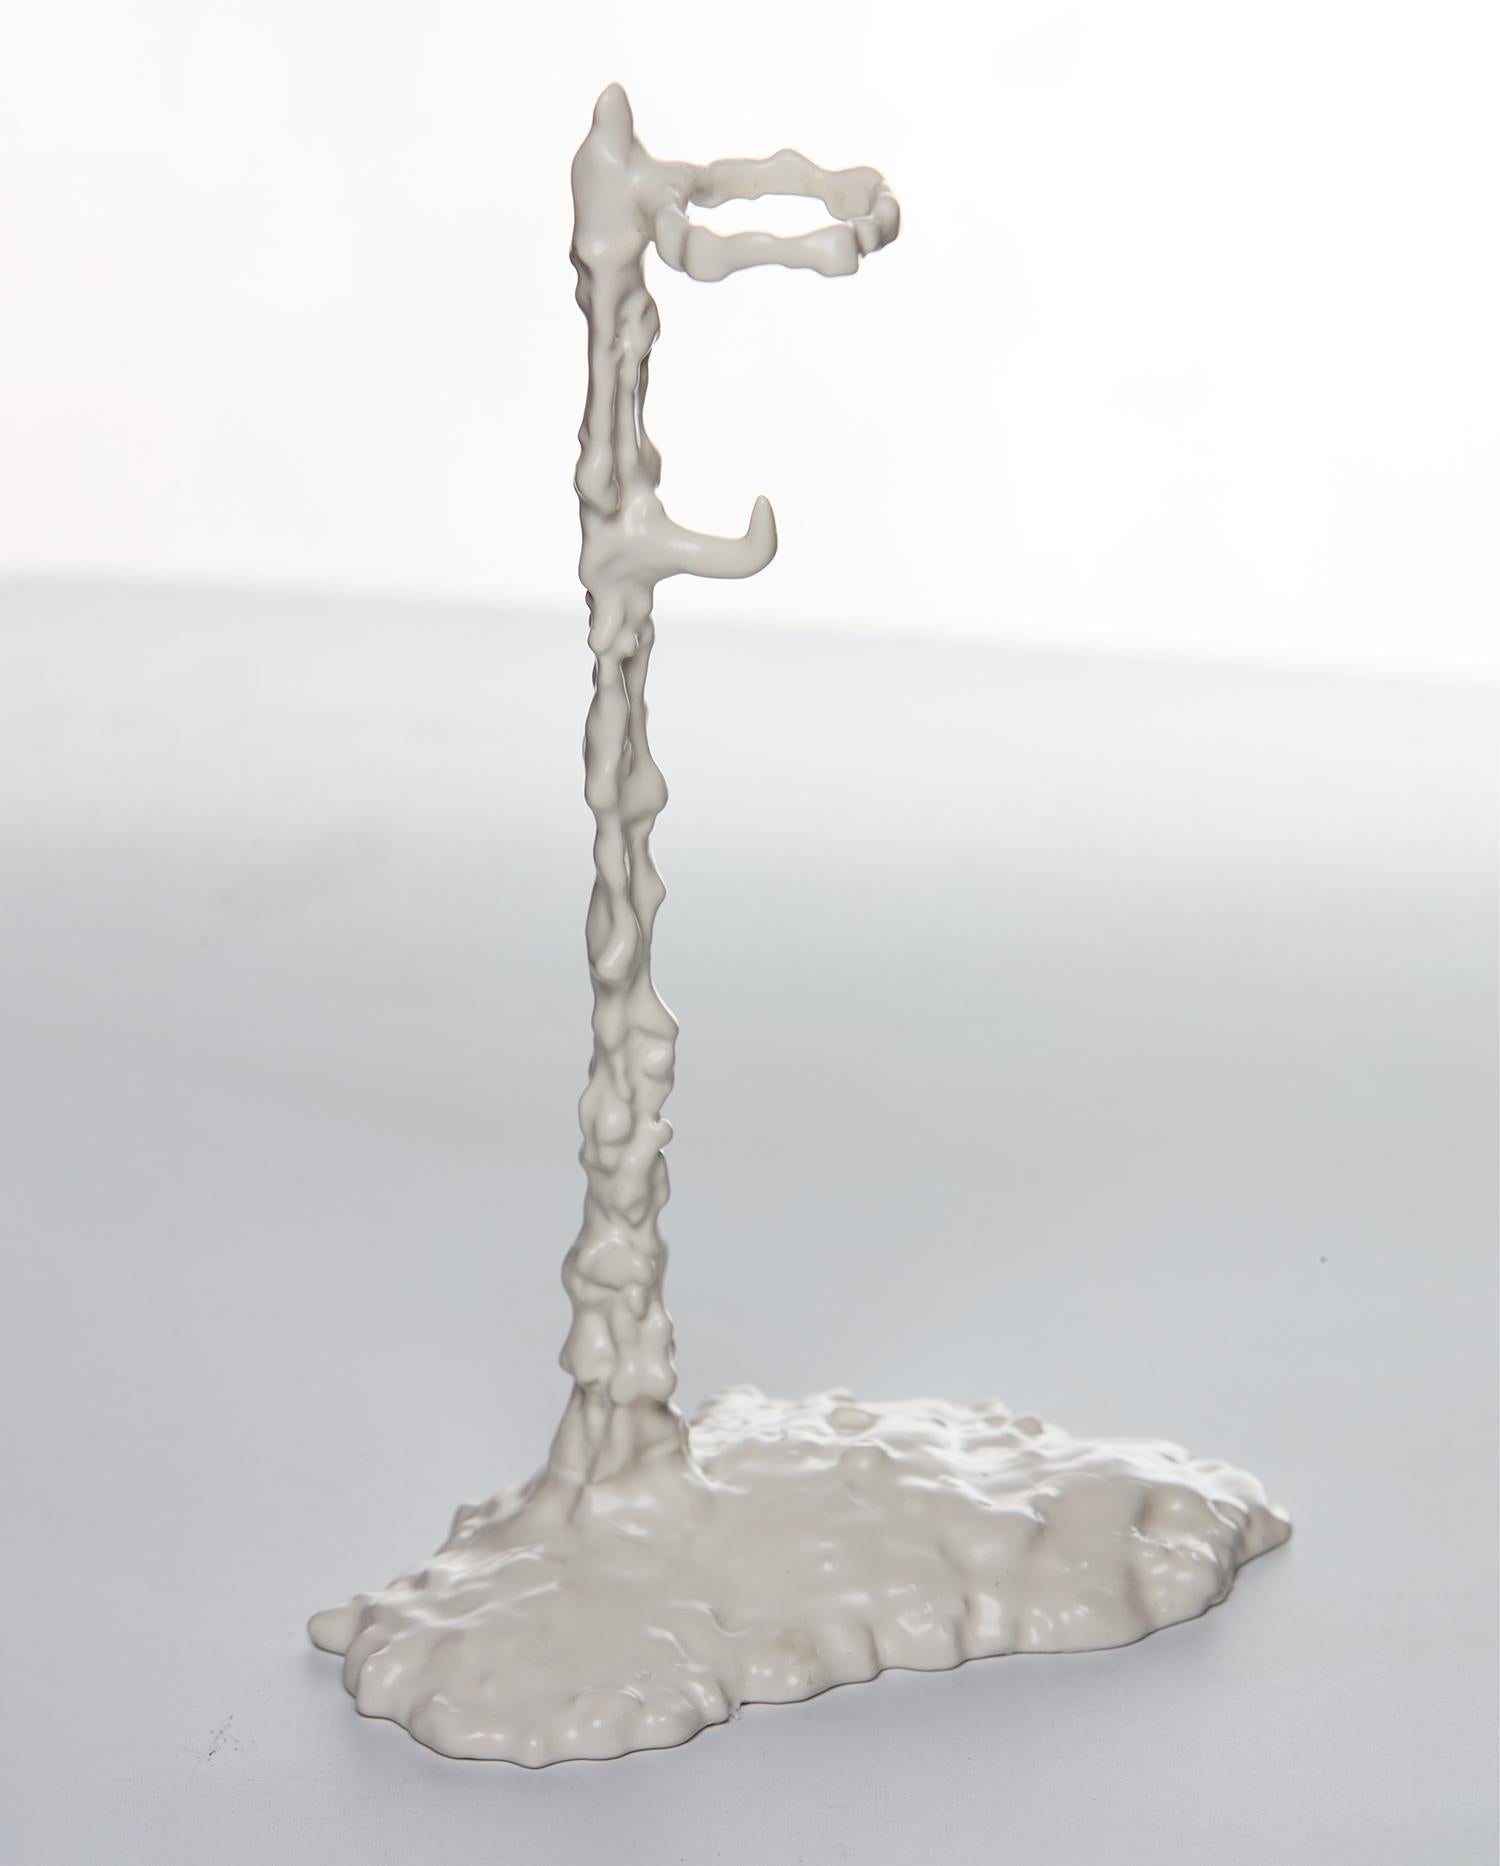 Alberto Low Candleholder by Oscar Tusquets
Dimensions: D 6 x W 10 x H 20 cm.
Materials: Cast iron painted in matte white.

Available in two different sizes: low (D 6 x W 10 x H 20 cm) and high (D 8 x W 12 x H 28 cm). Please contact us.

In a